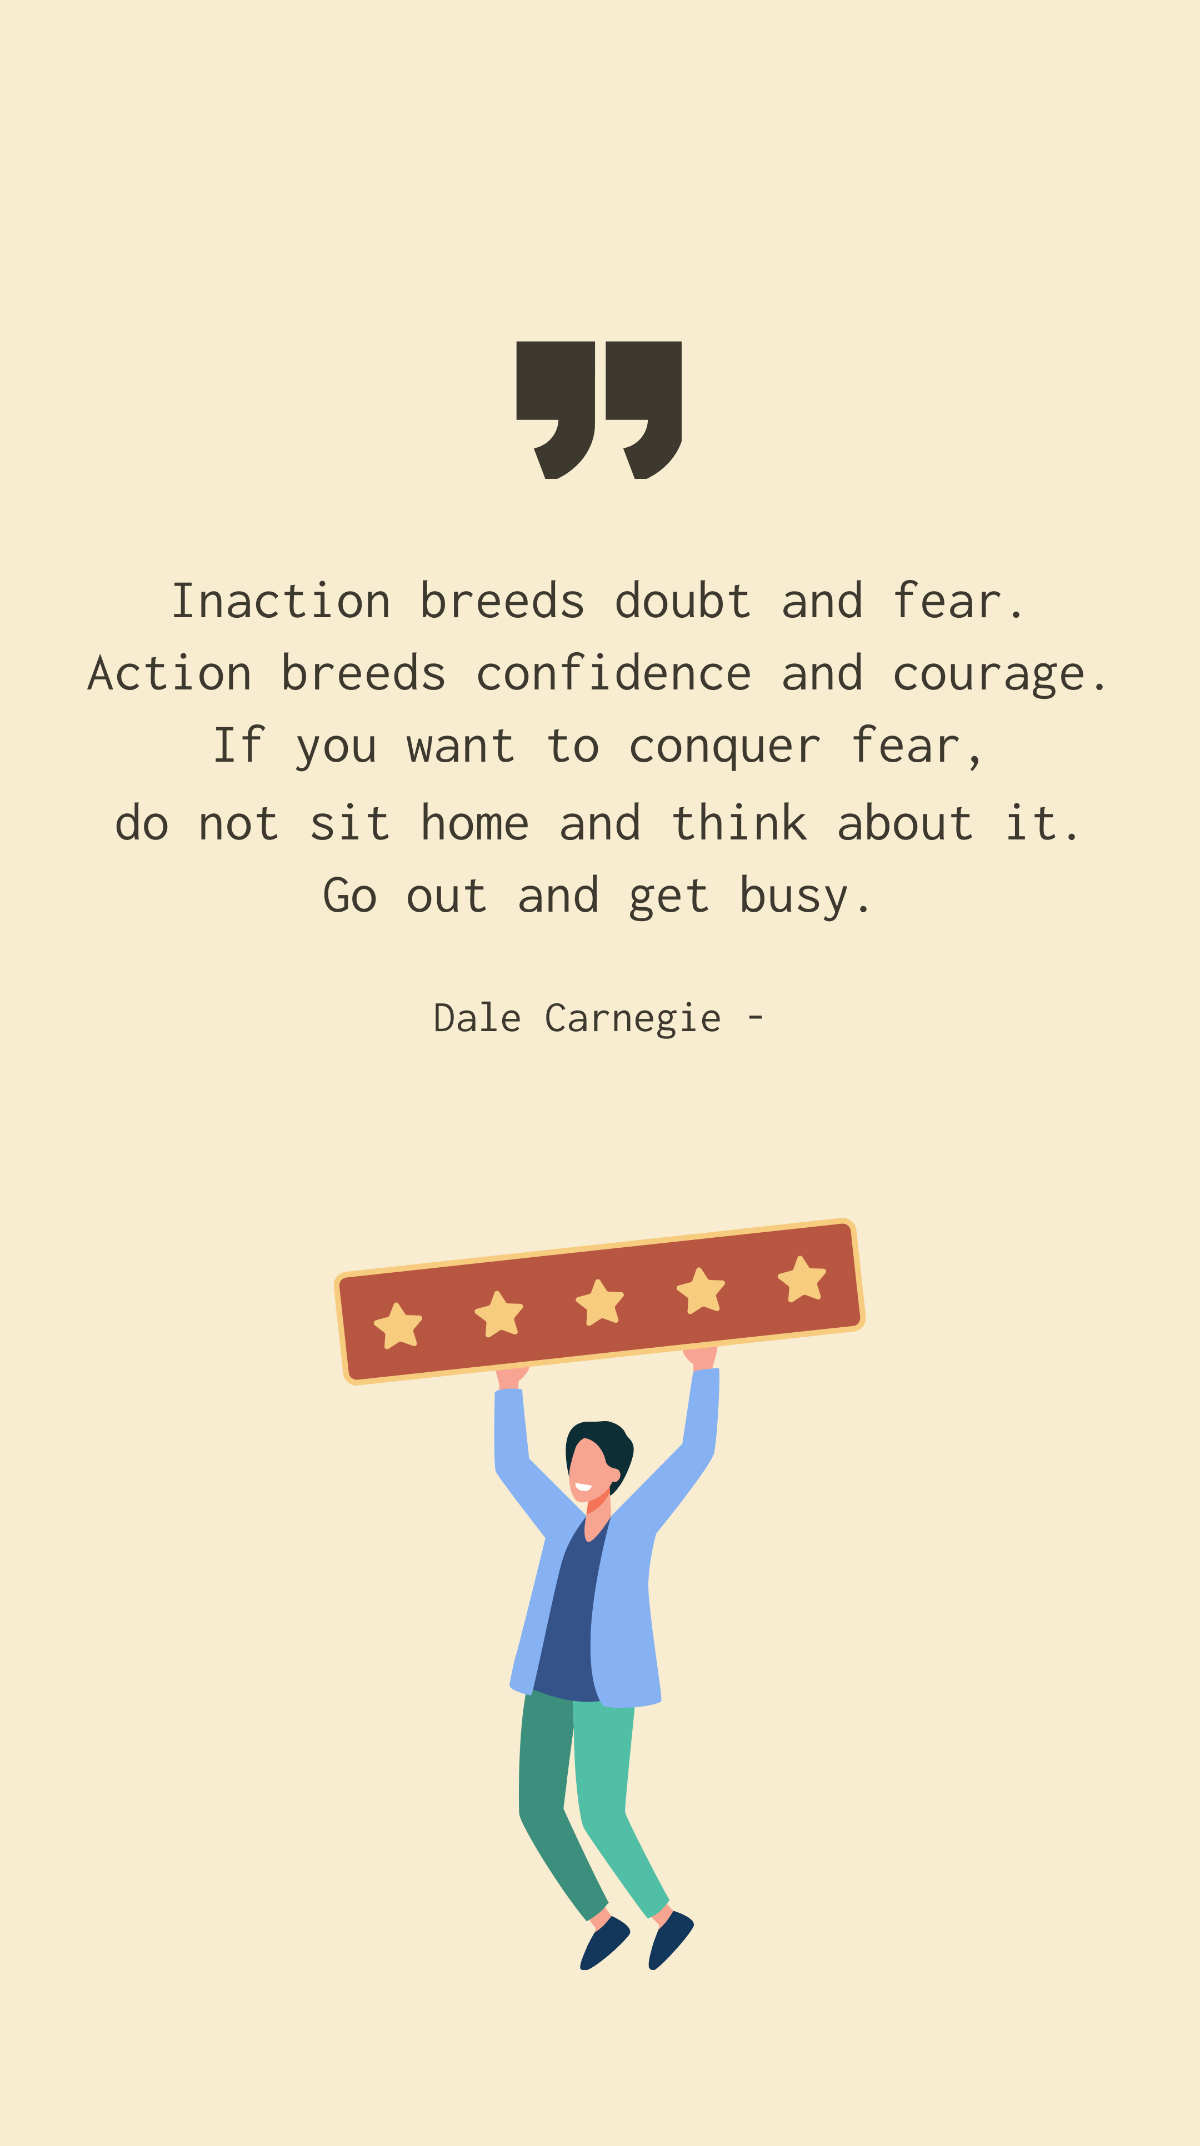 Dale Carnegie - Inaction breeds doubt and fear. Action breeds confidence and courage. If you want to conquer fear, do not sit home and think about it. Go out and get busy. Template